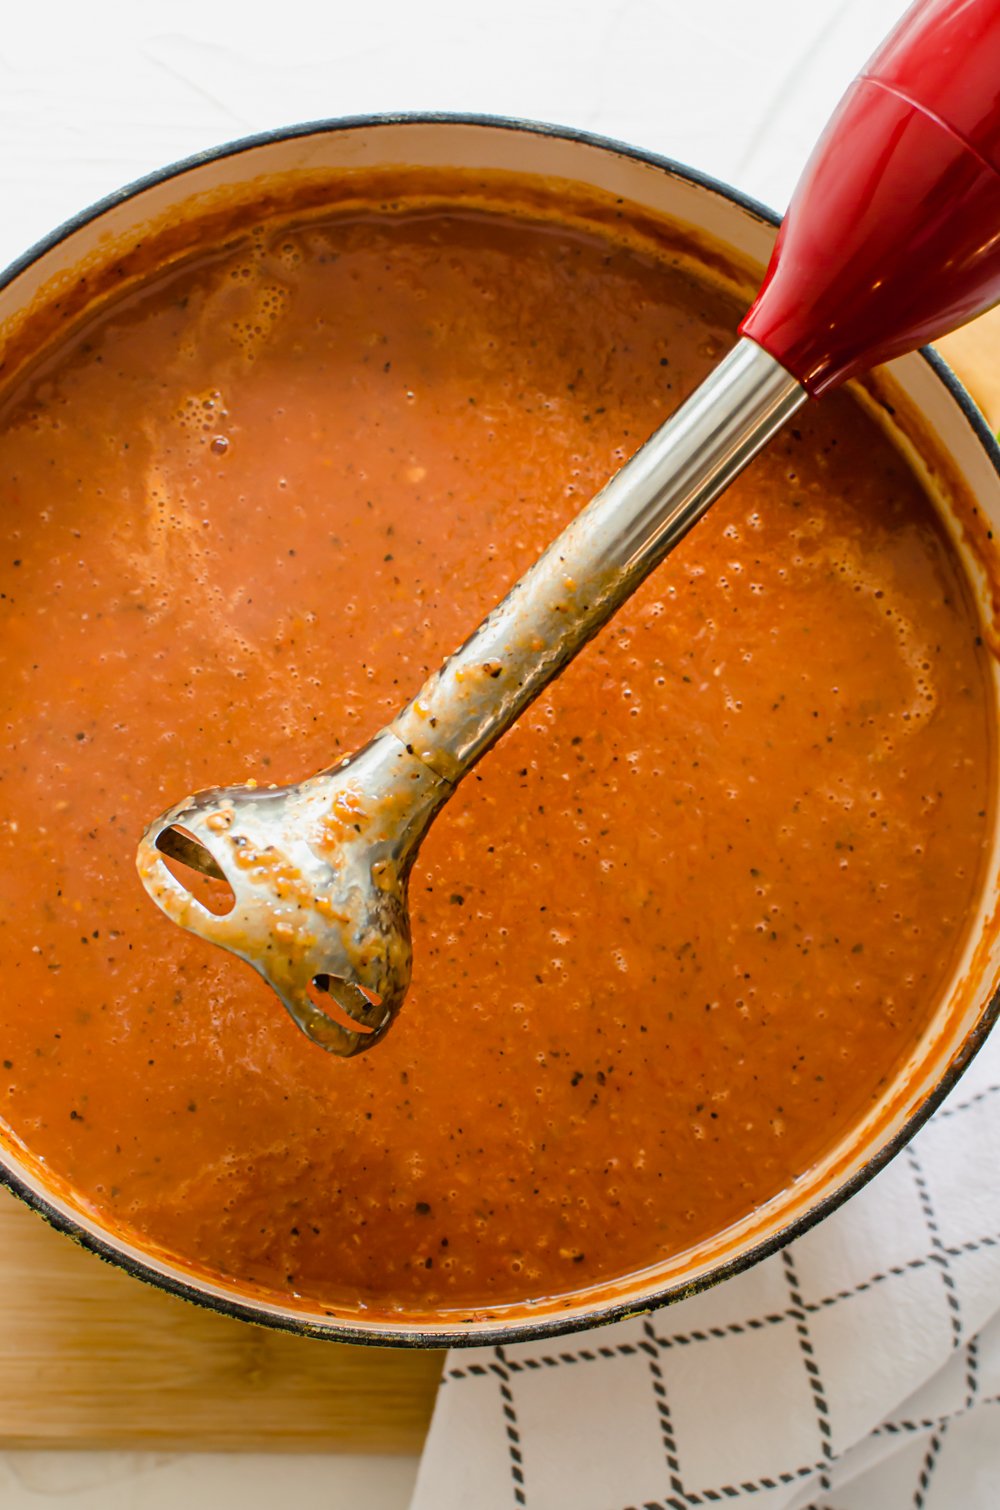 process shot of using an immersion blender in a pot of tomato bisque soup.